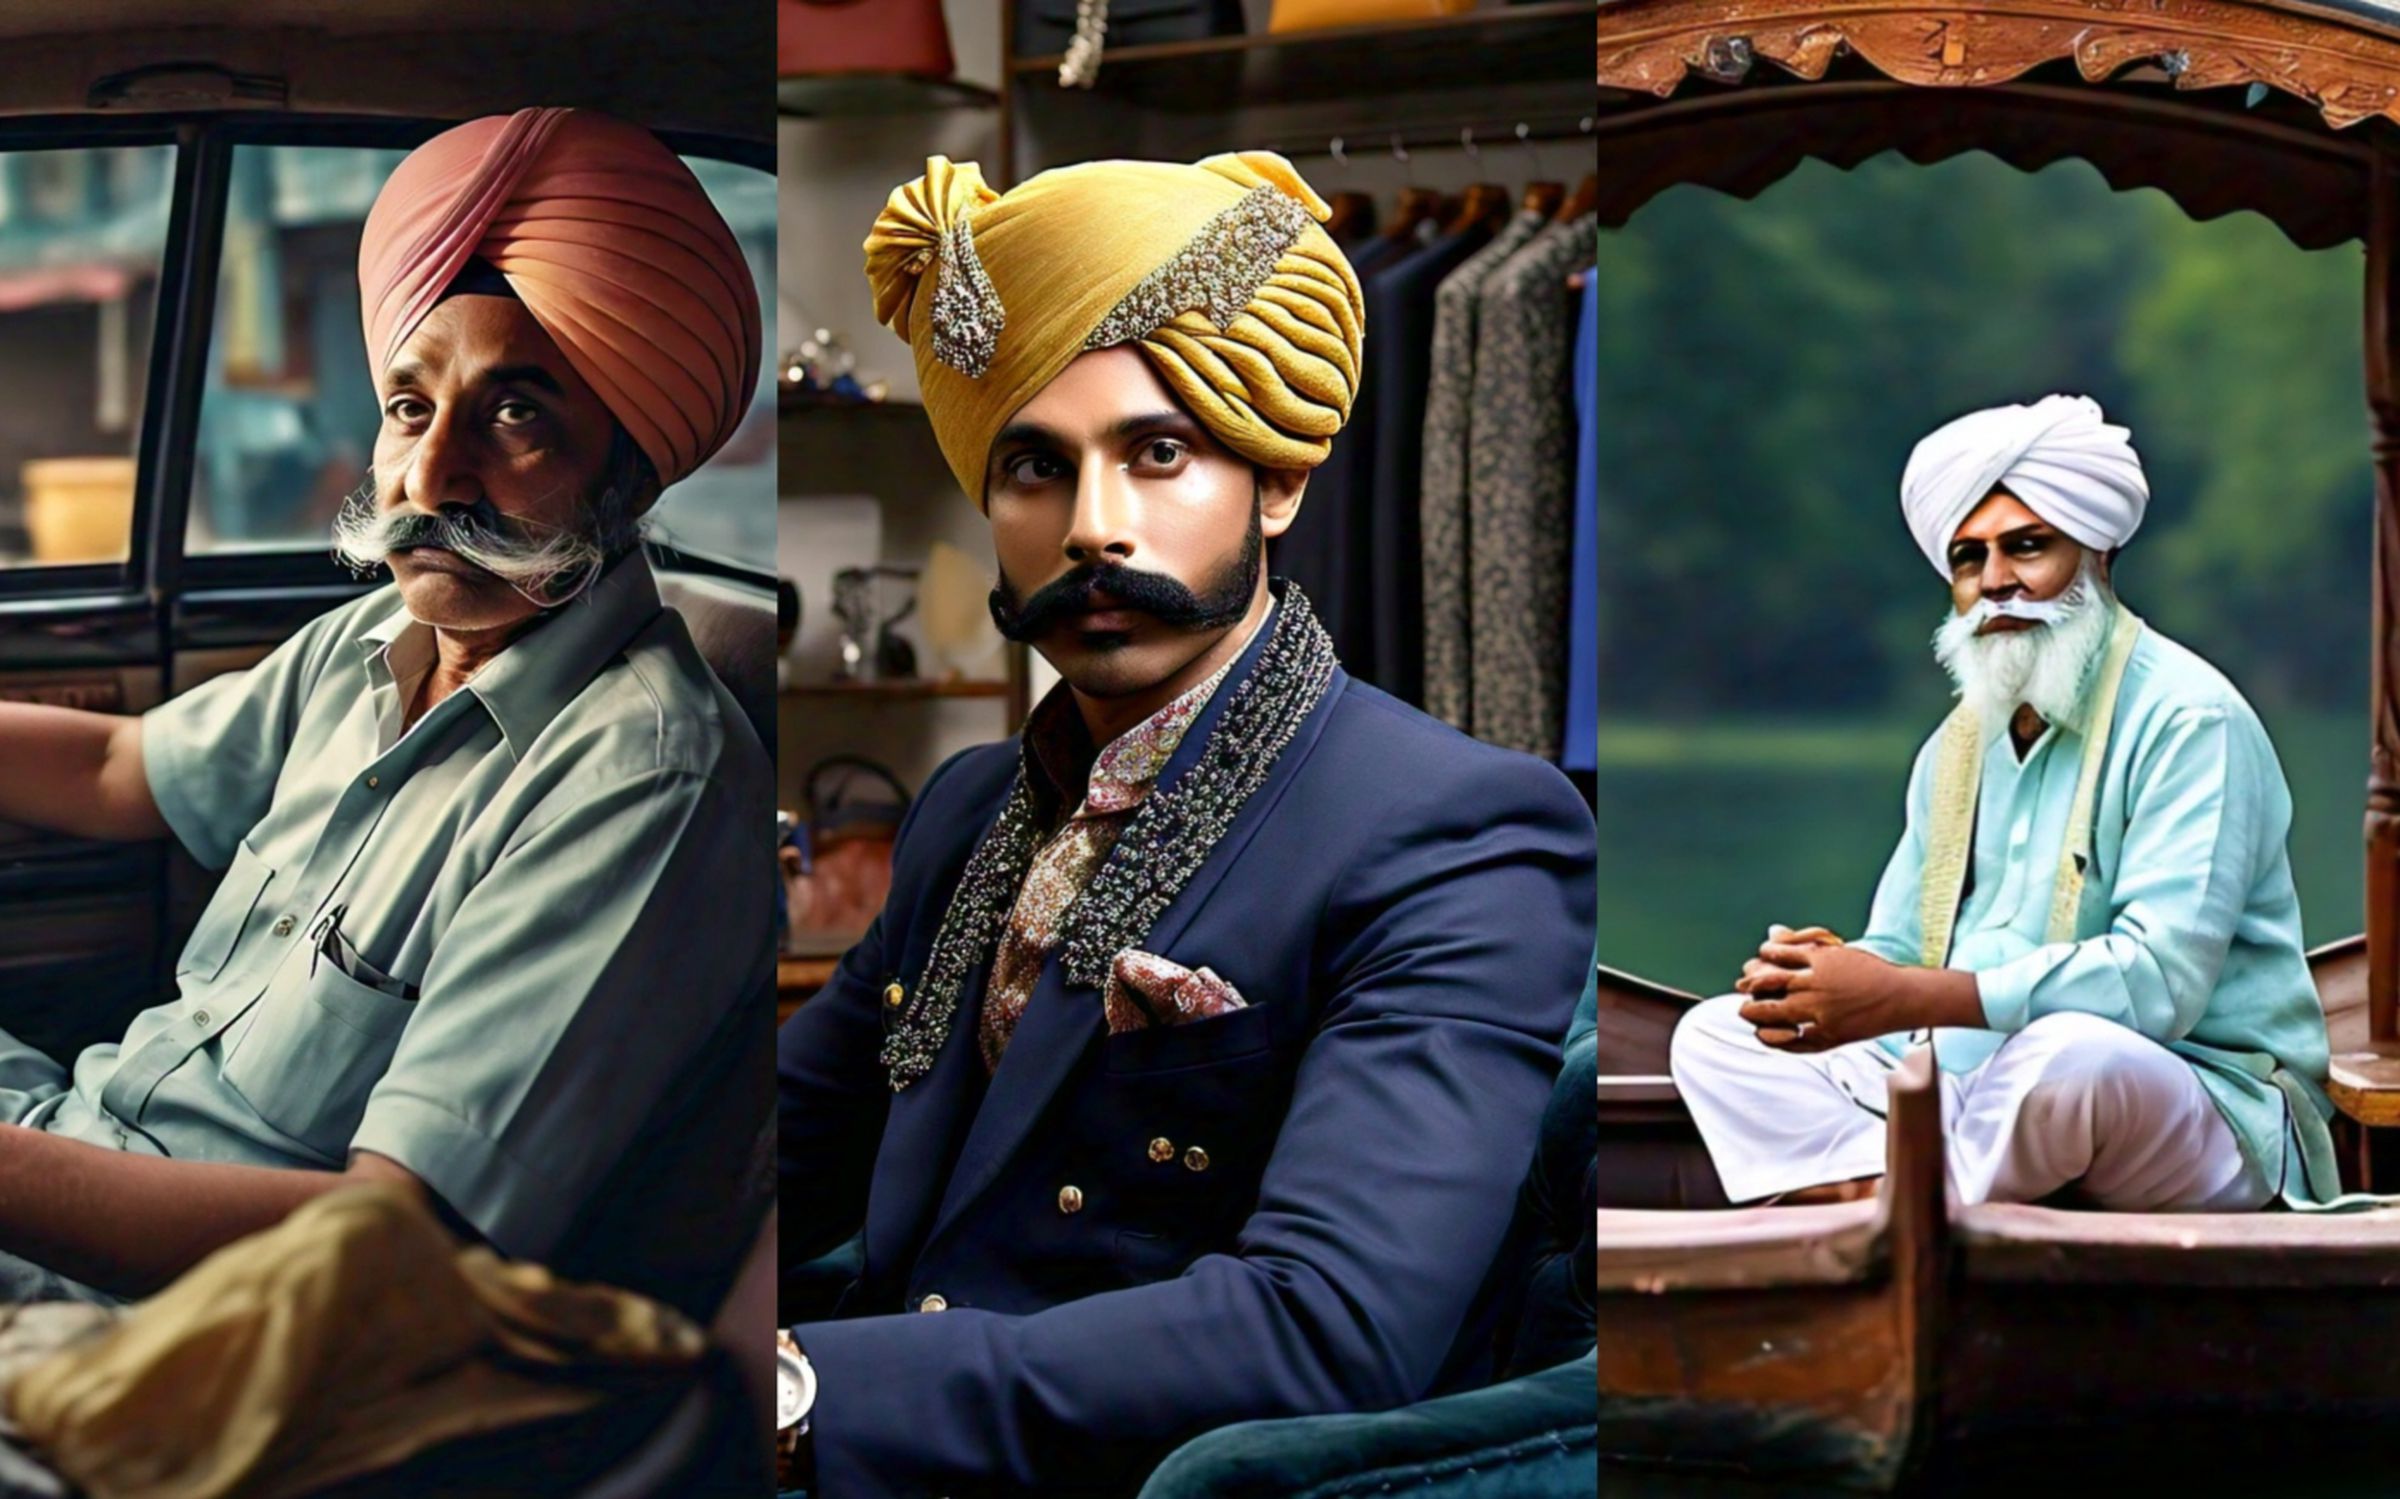 three AI images of Indian men wearing turbans